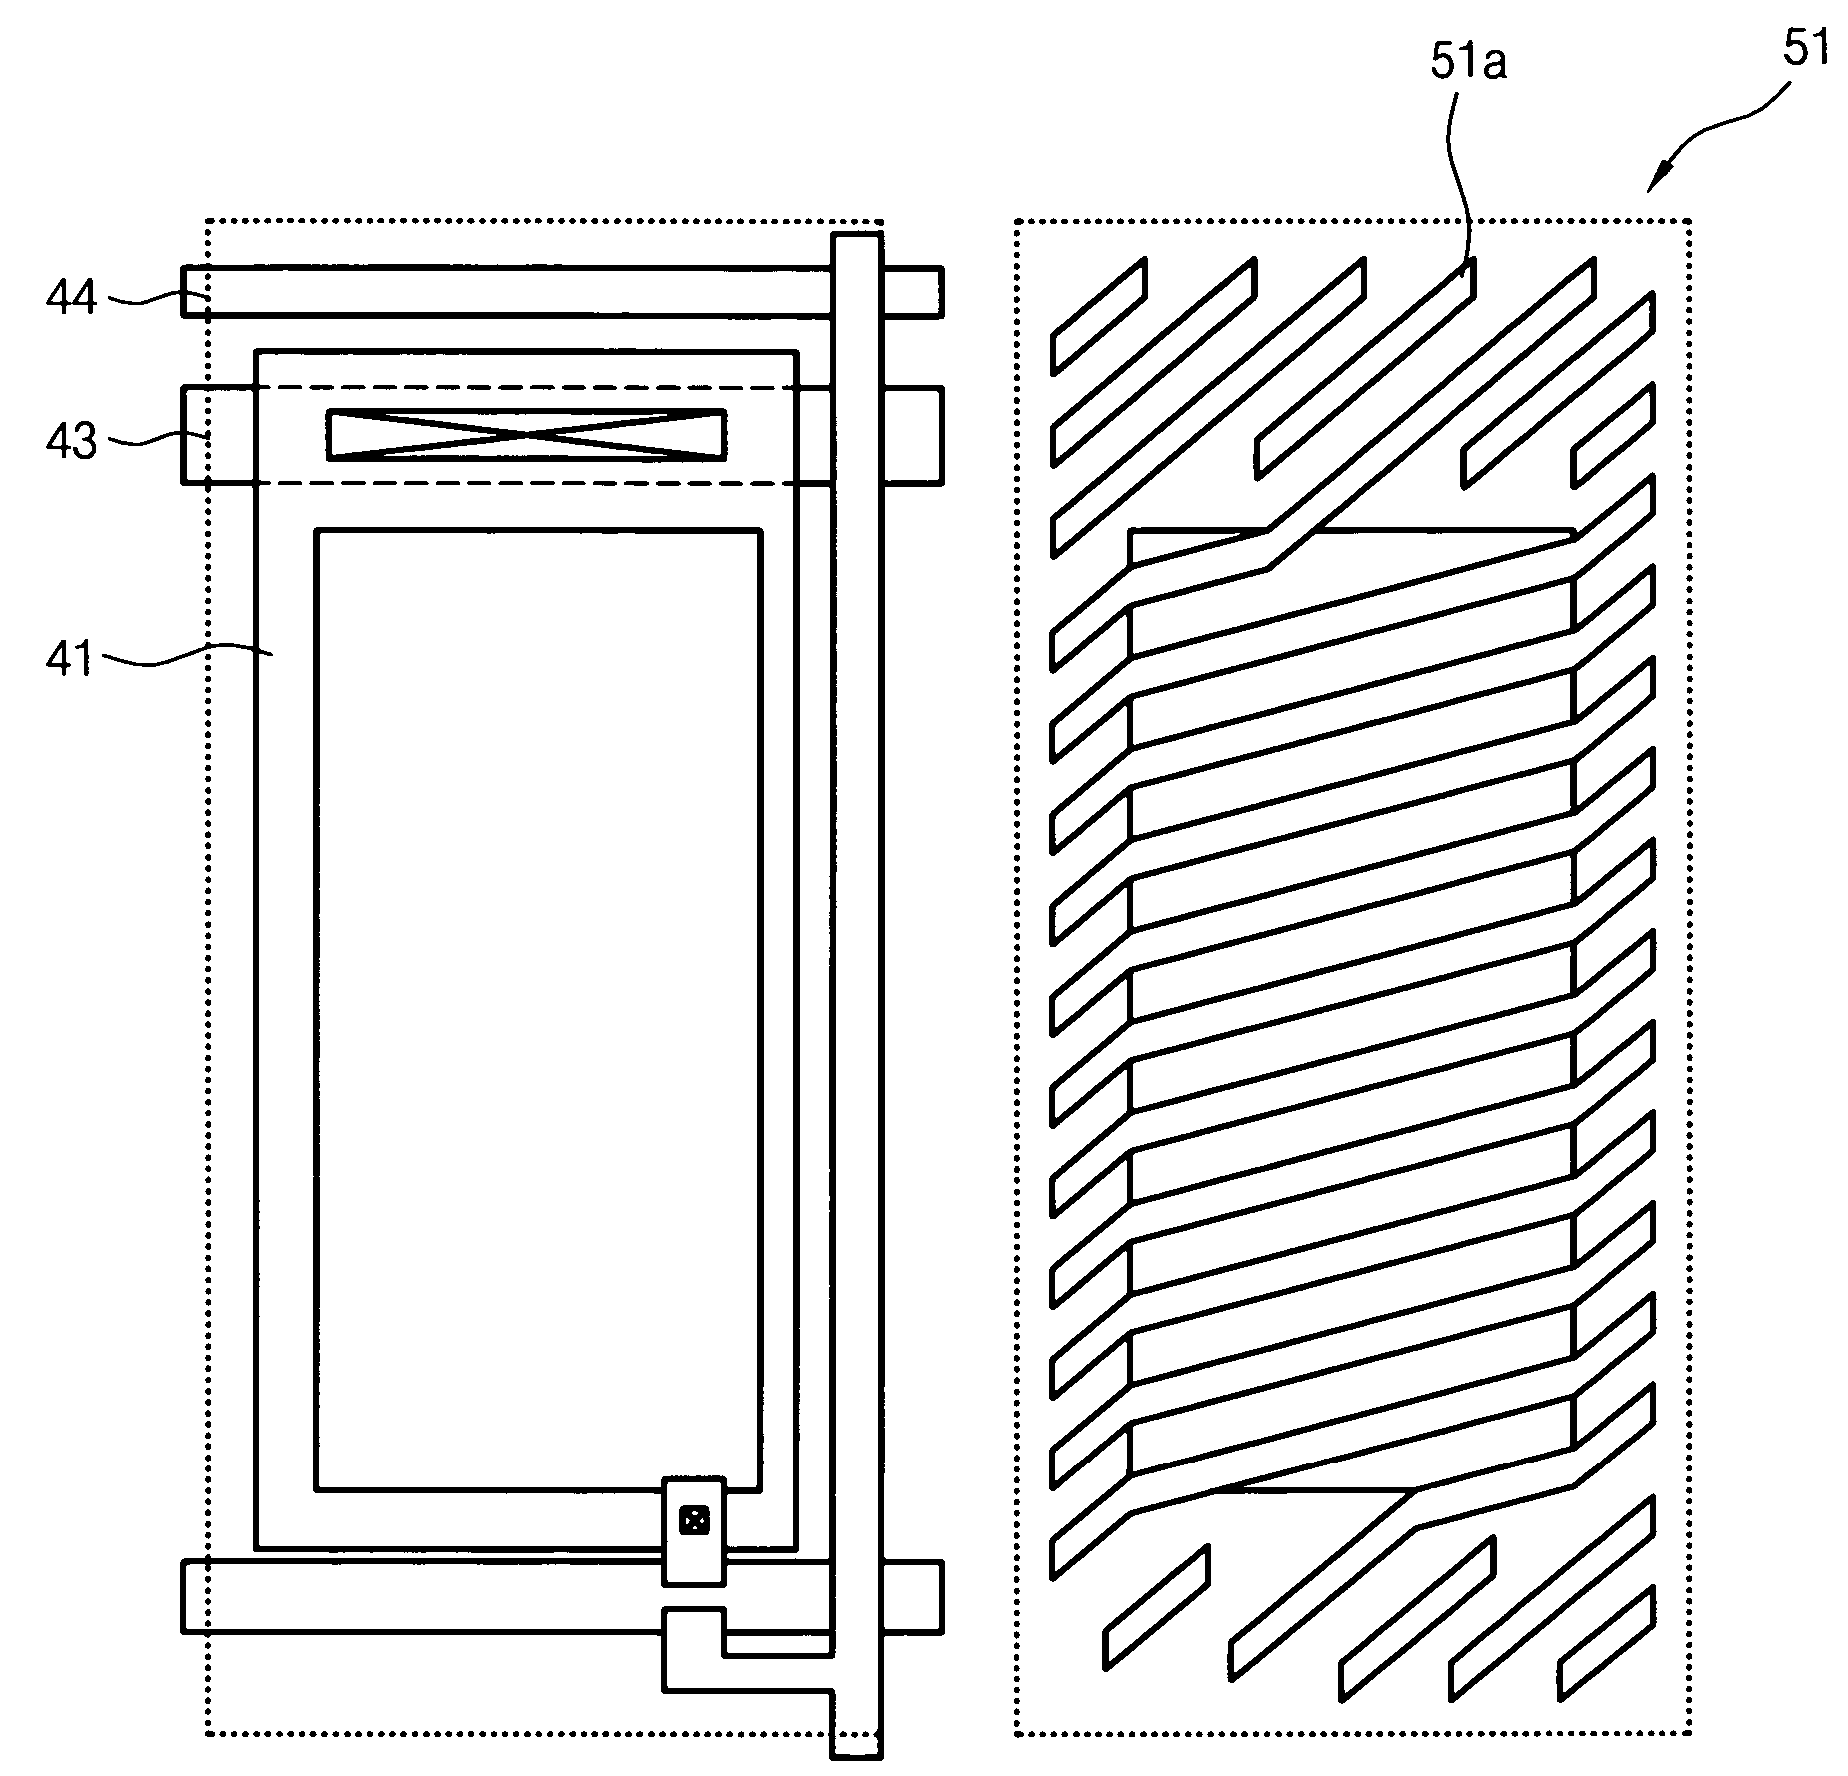 Fringe field switching mode transflective LCD having slits in the reflective area of a pixel electrode that have an inclination angle greater than slits in the transmissive area by about 10 to 40 degrees